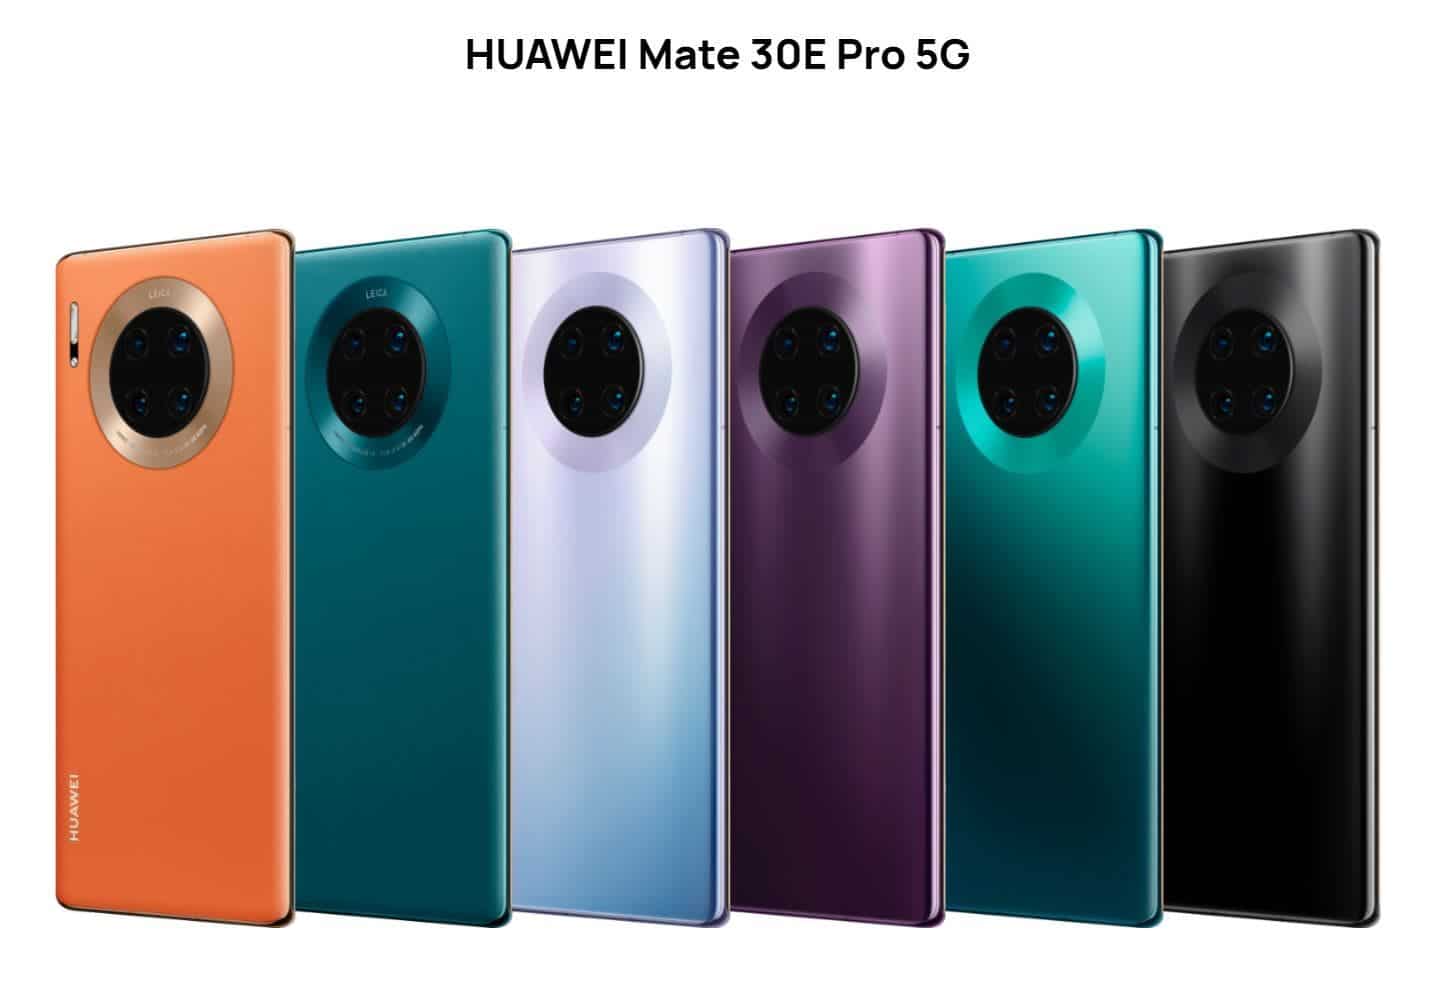 Huawei Mate 30E Pro Launched as a More Affordable Variant of the Mate 30